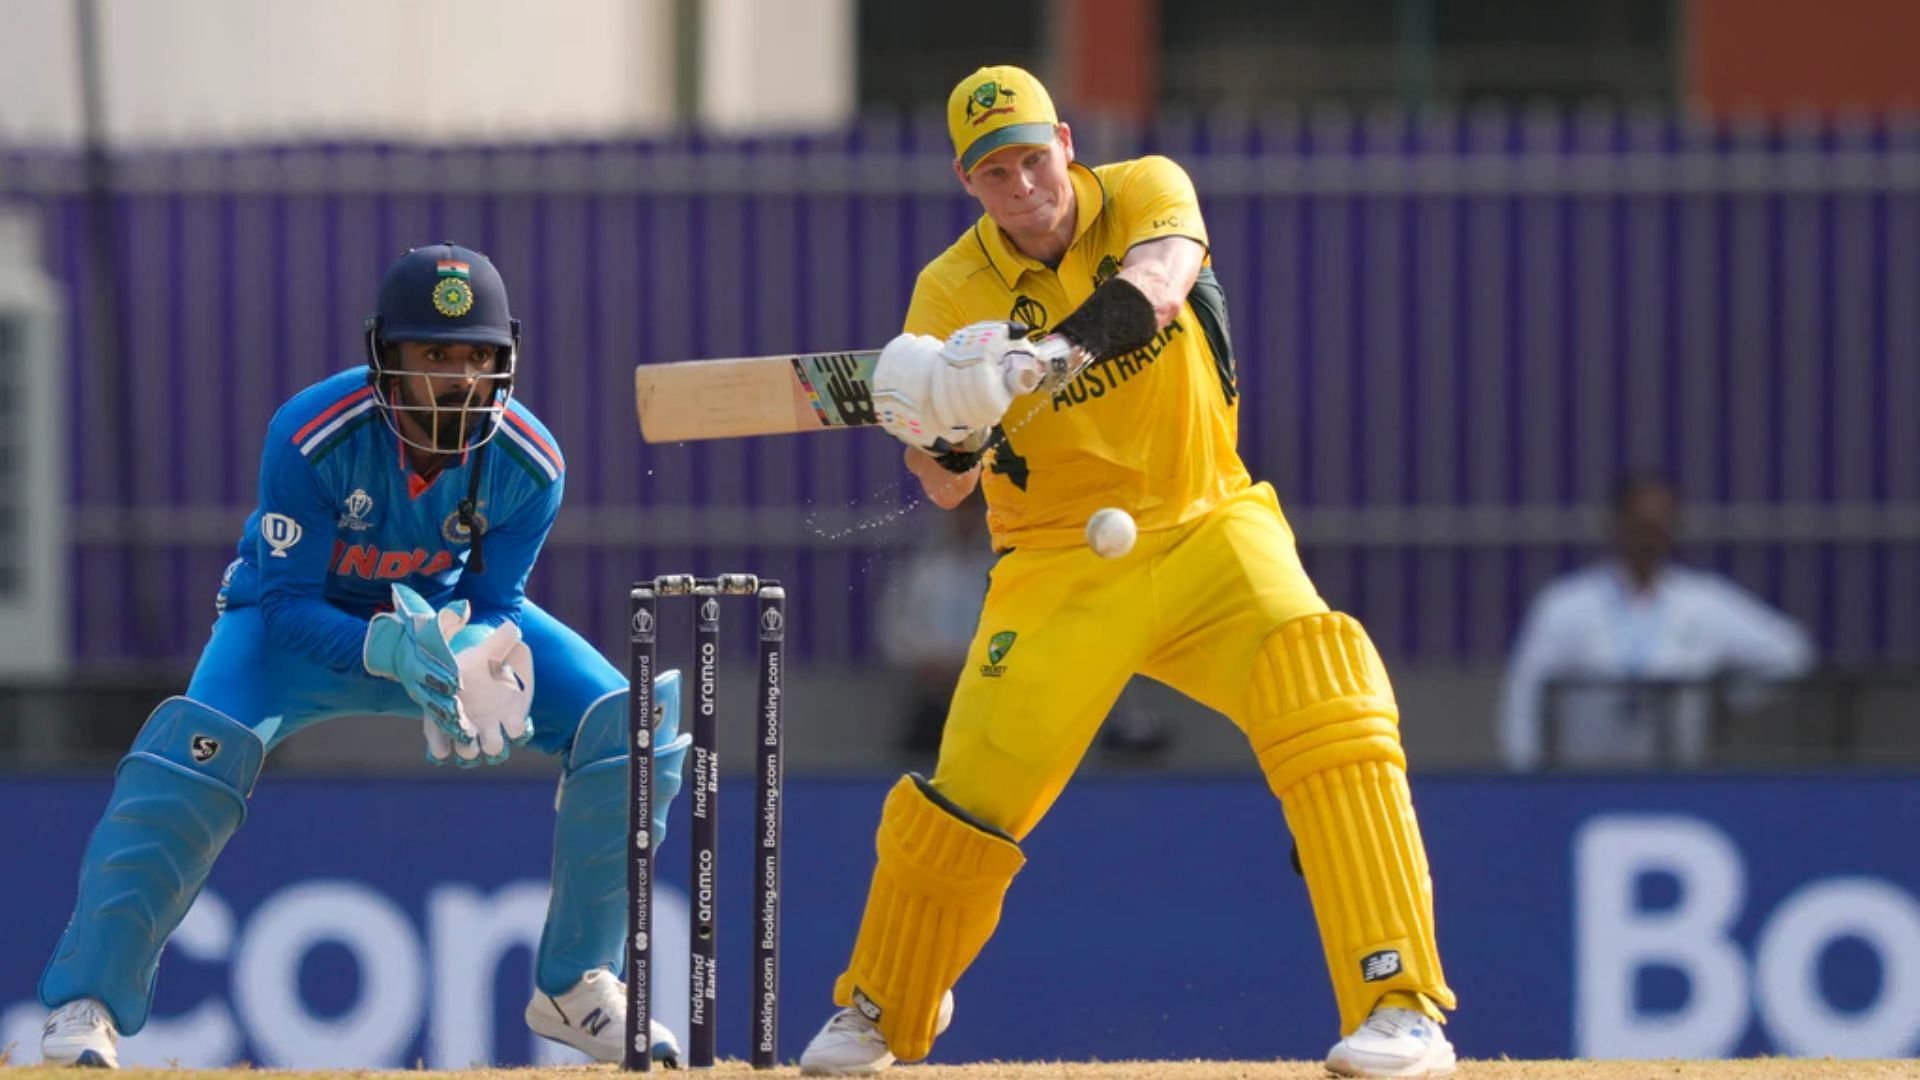 Arguably the most fluent Steve Smith has looked with the bat in this World Cup was against India in their opening game.